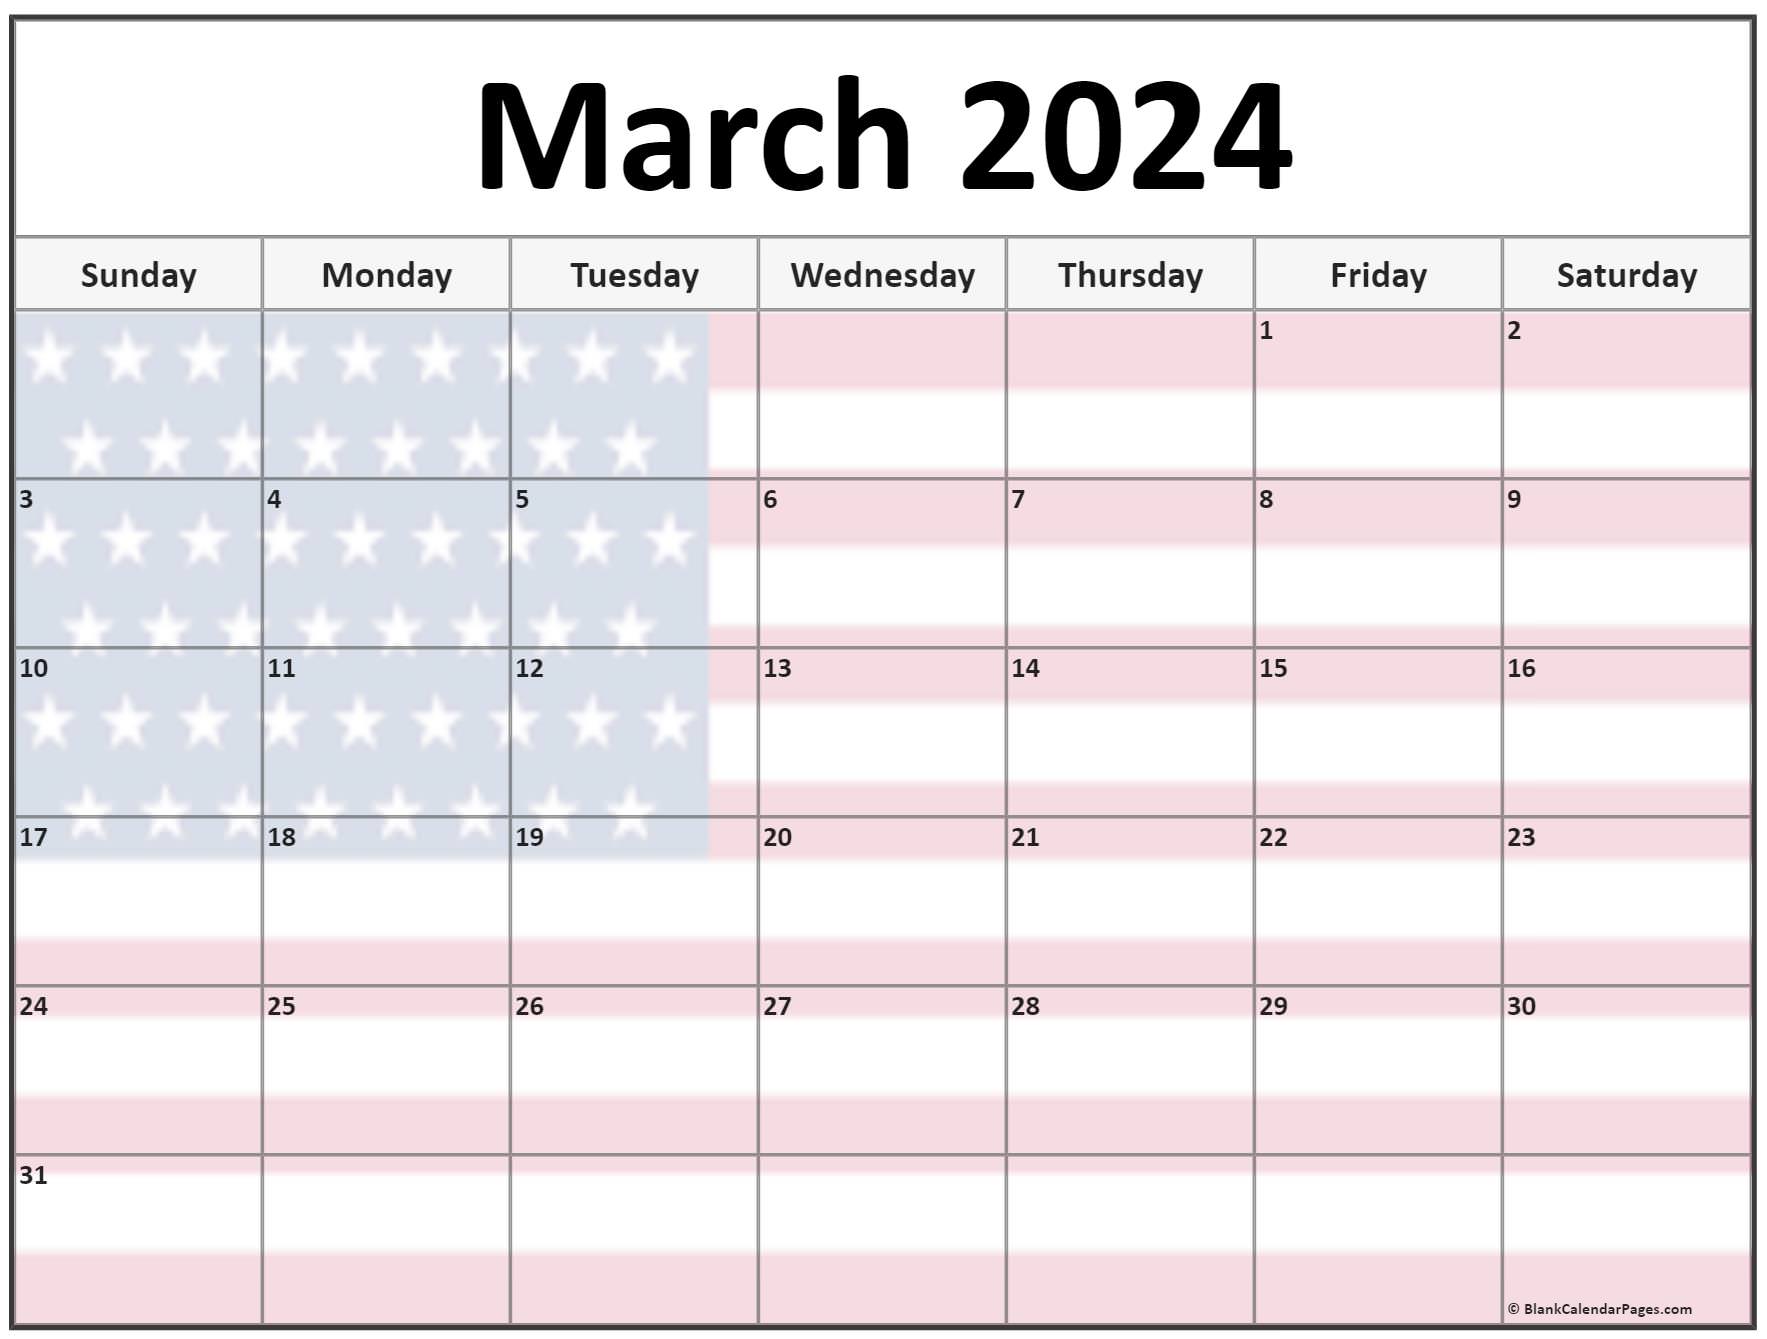 collection-of-march-2023-photo-calendars-with-image-filters